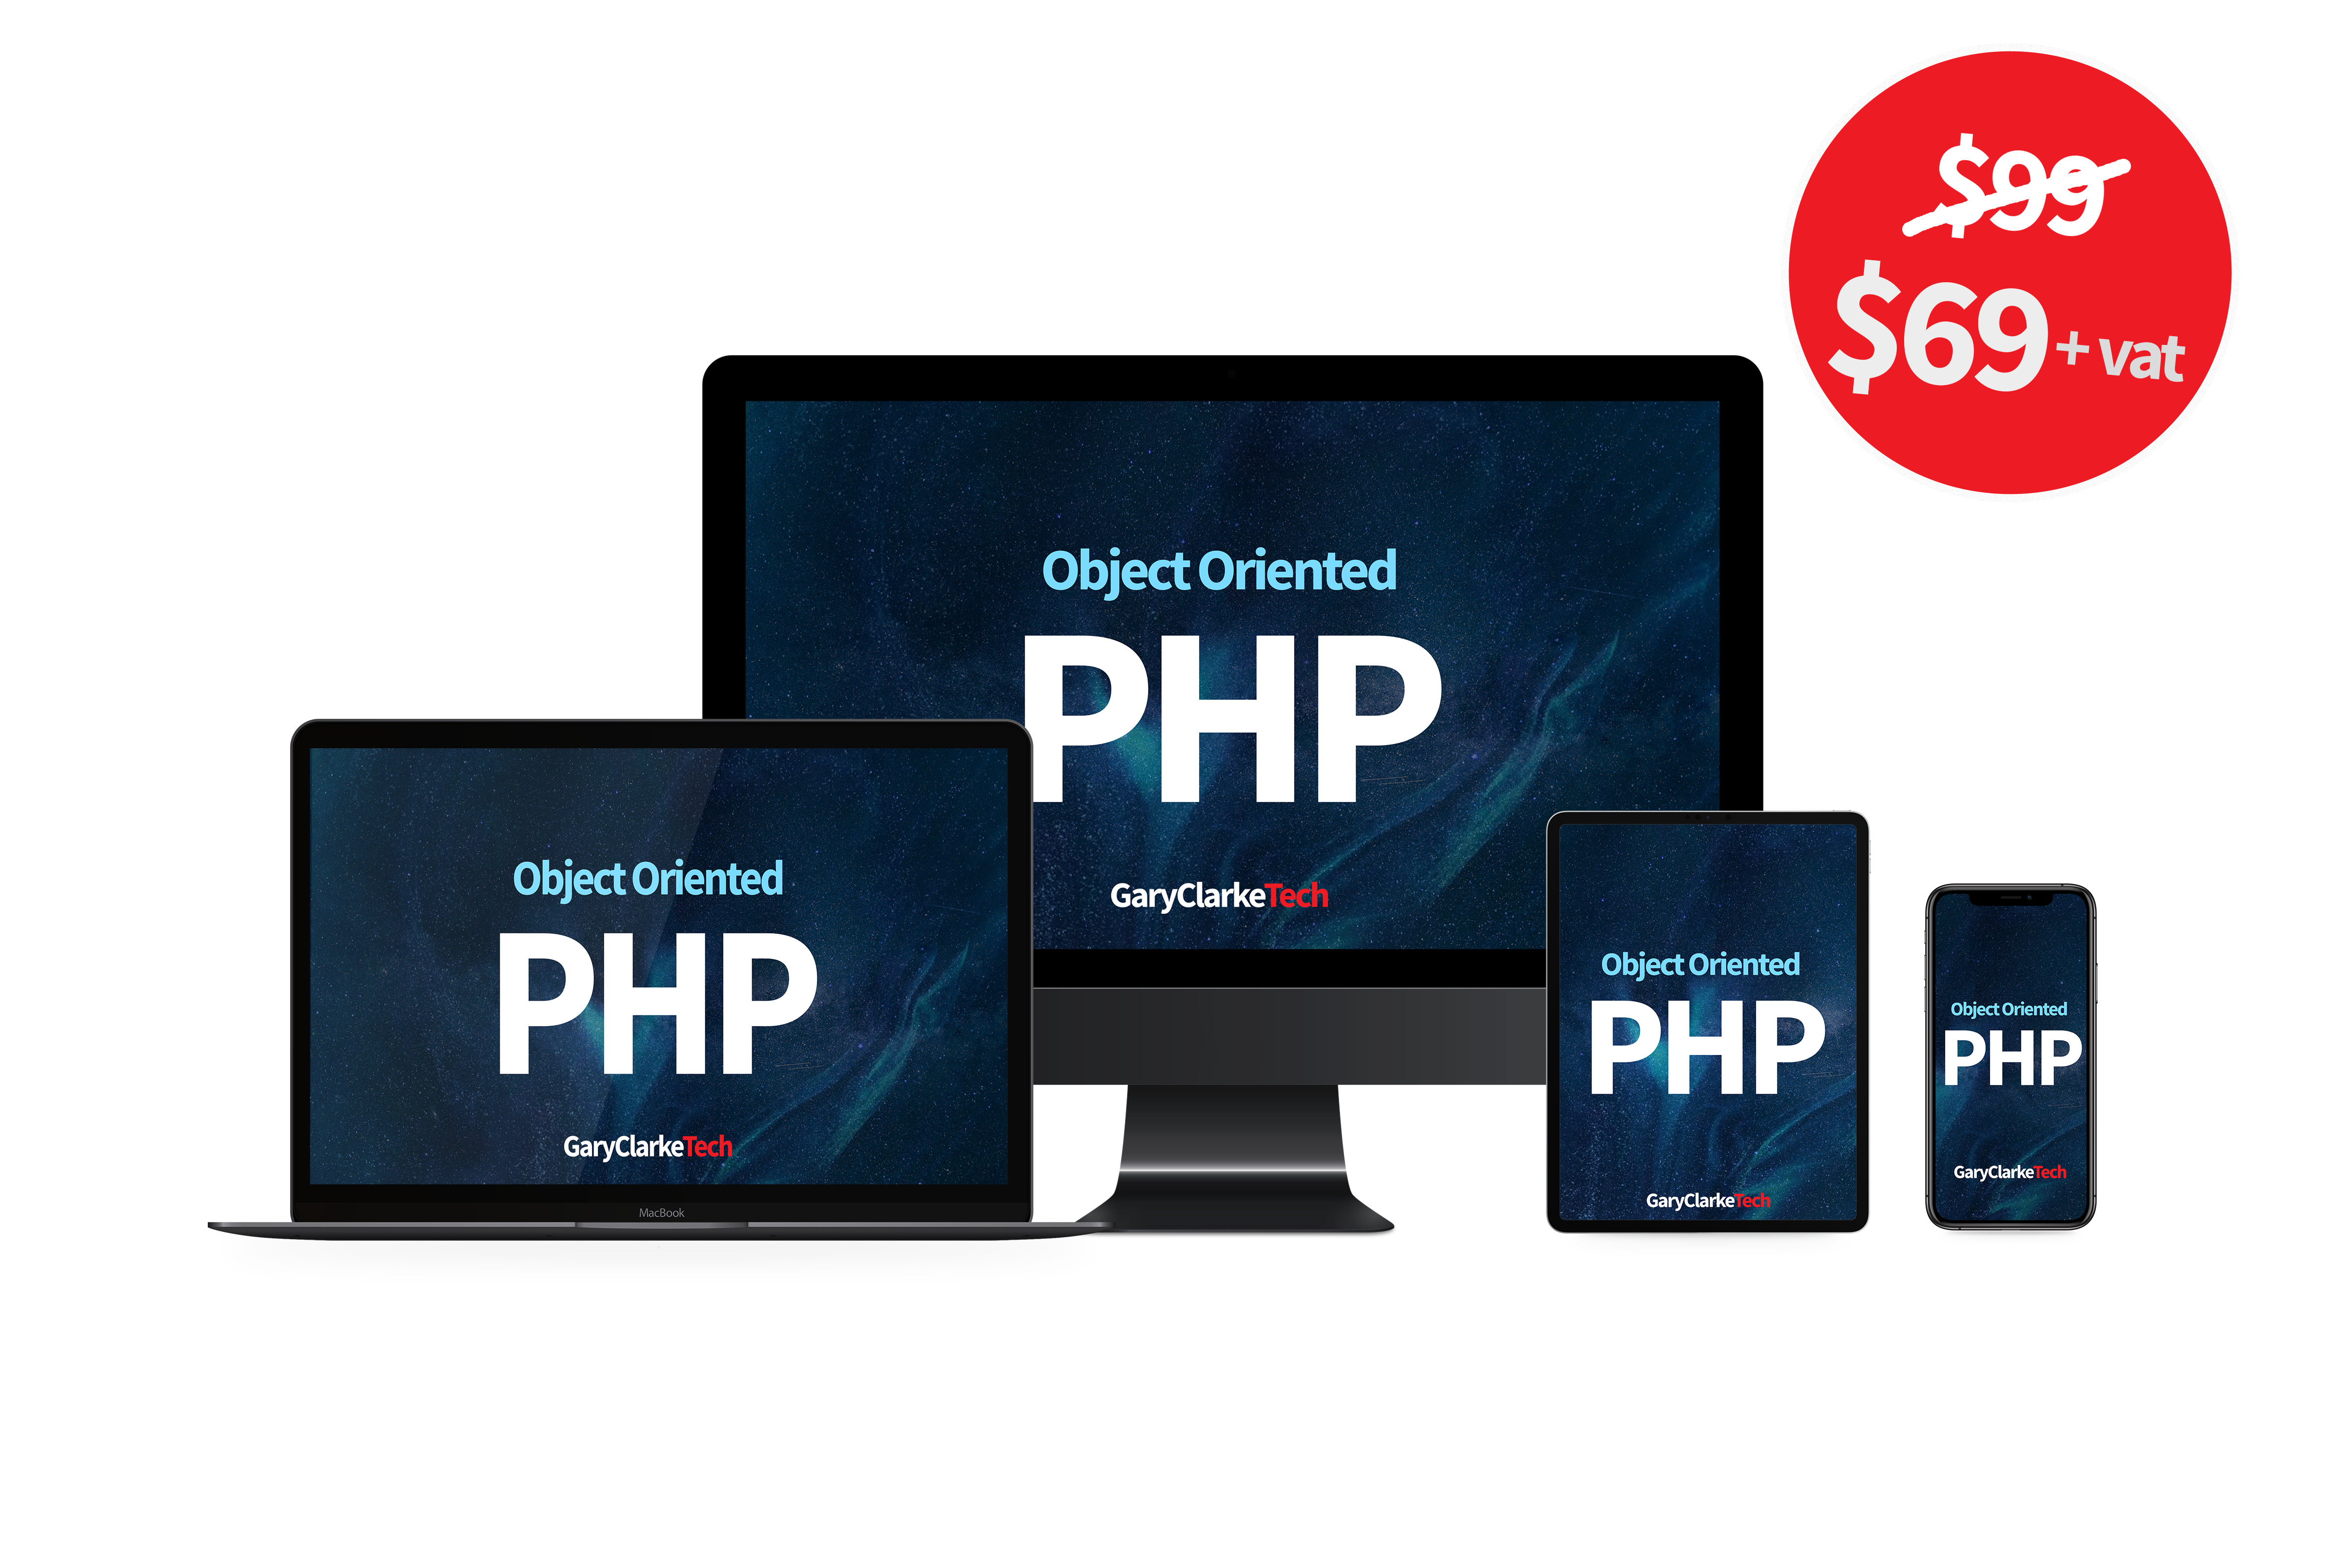 Object Oriented PHP on all devices